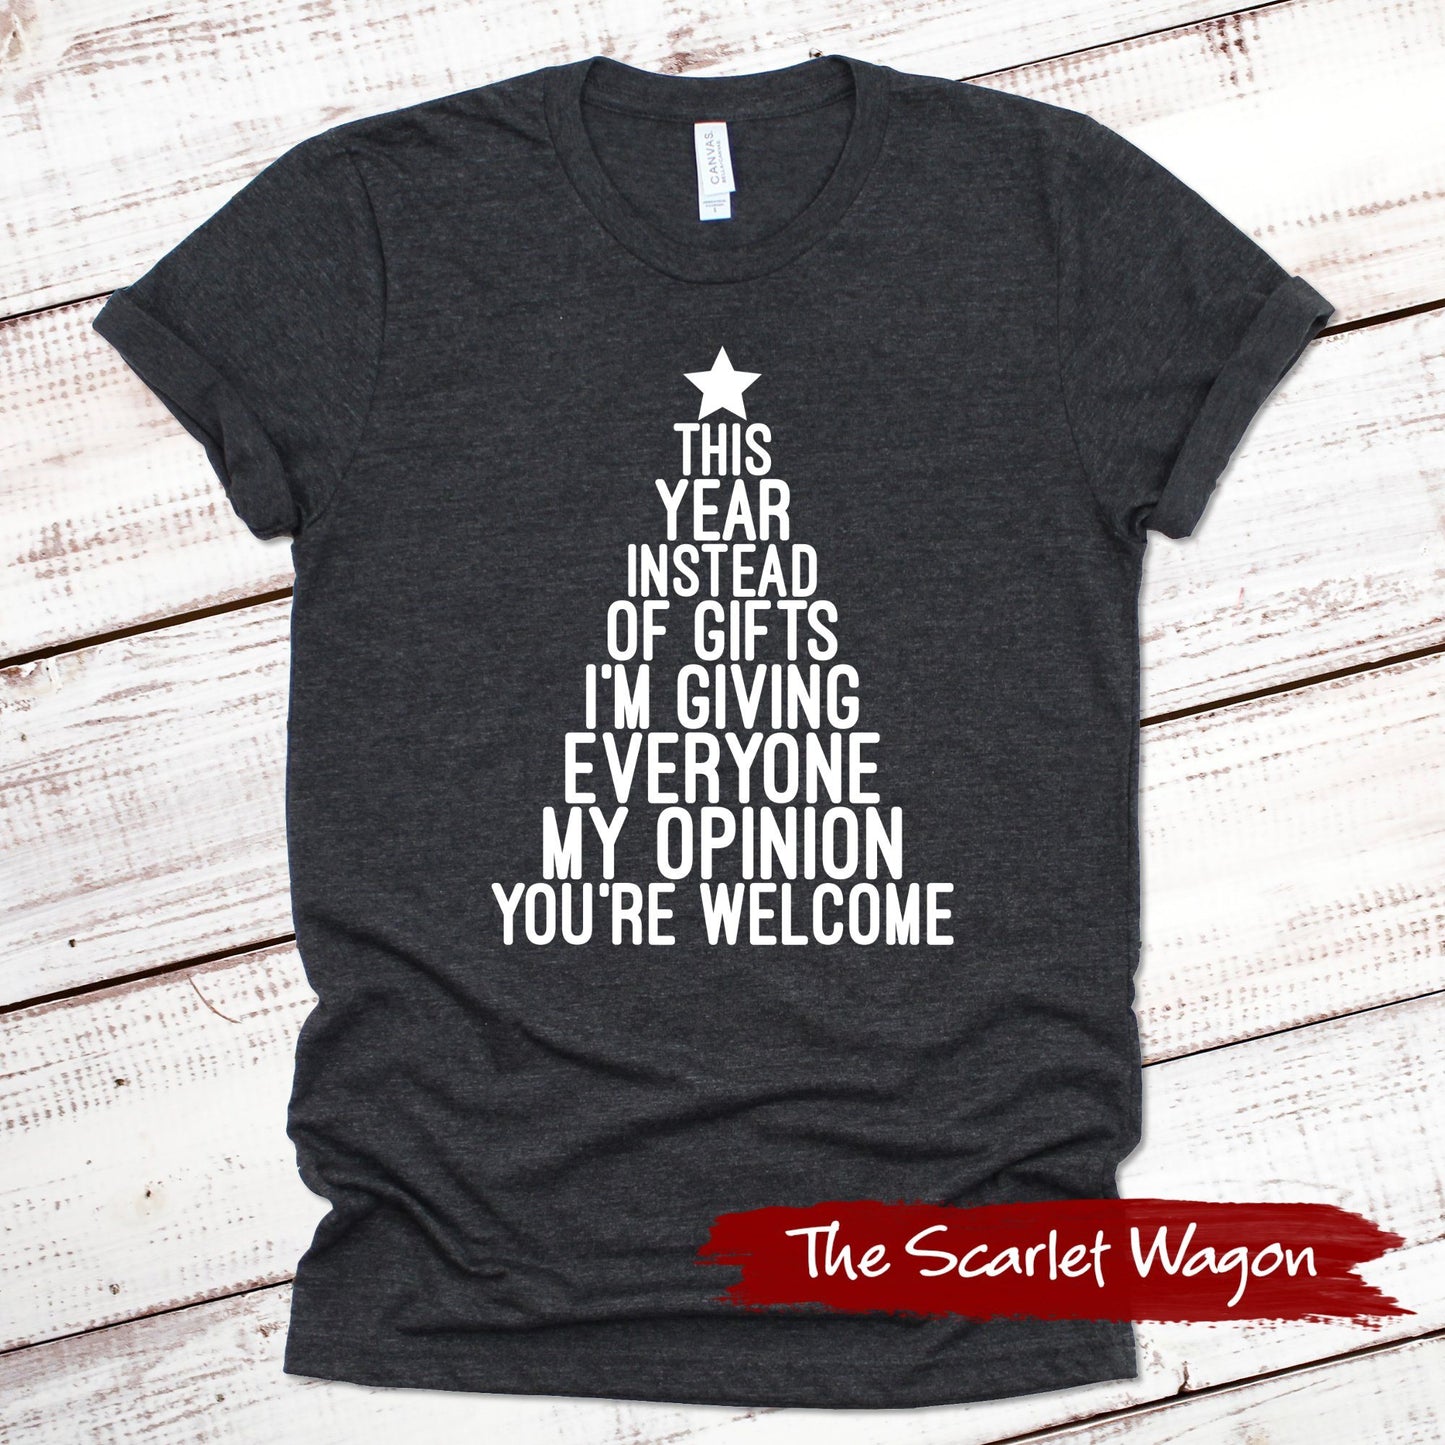 Instead of Gifts I'm Giving My Opinion Christmas Shirt Scarlet Wagon Dark Gray Heather XS 